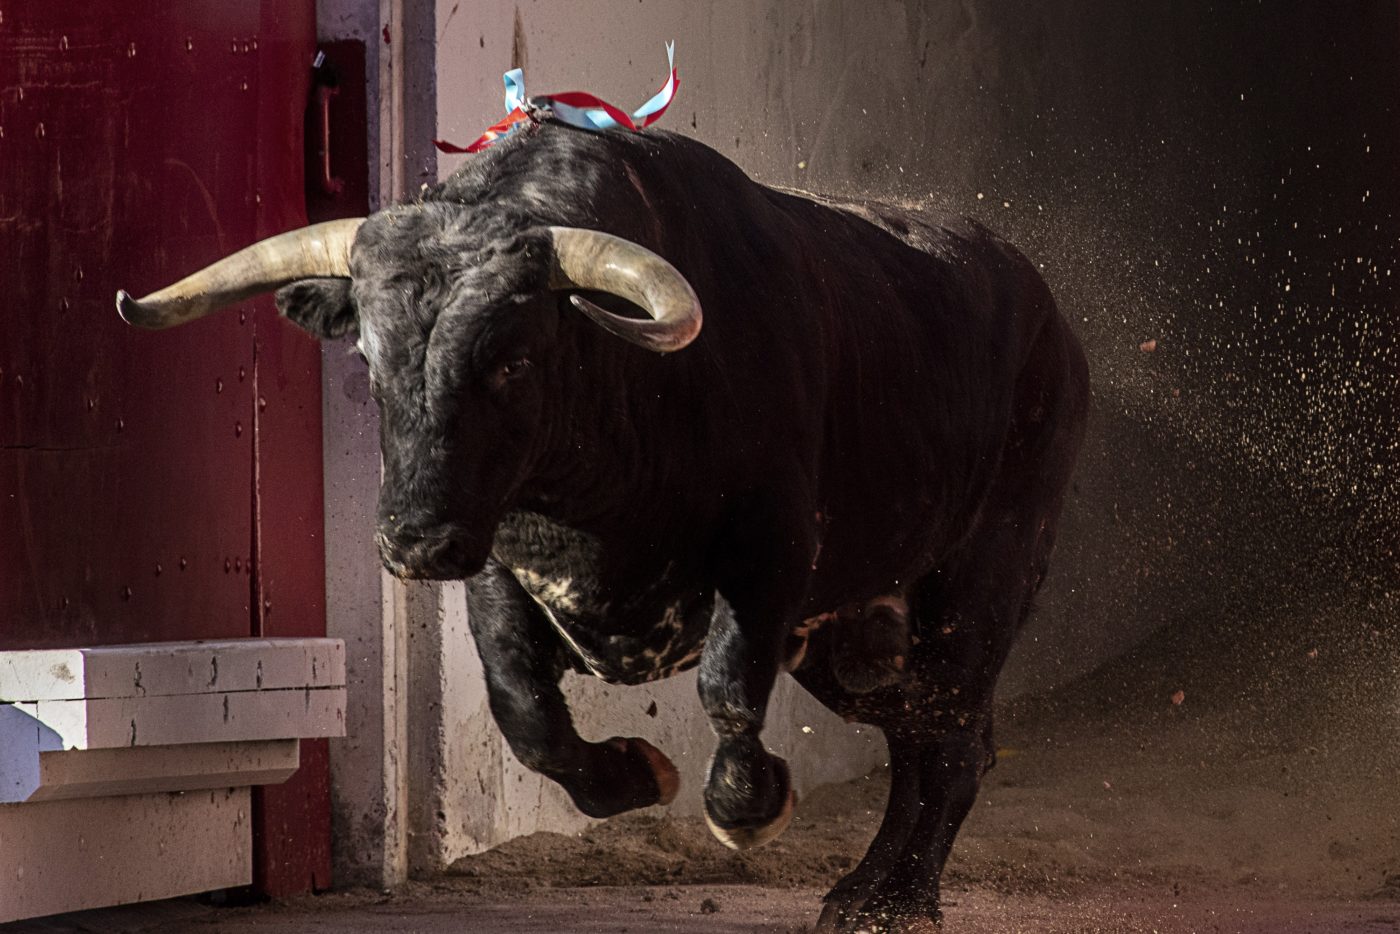 A bull charges directly towards the camera from the shadows.